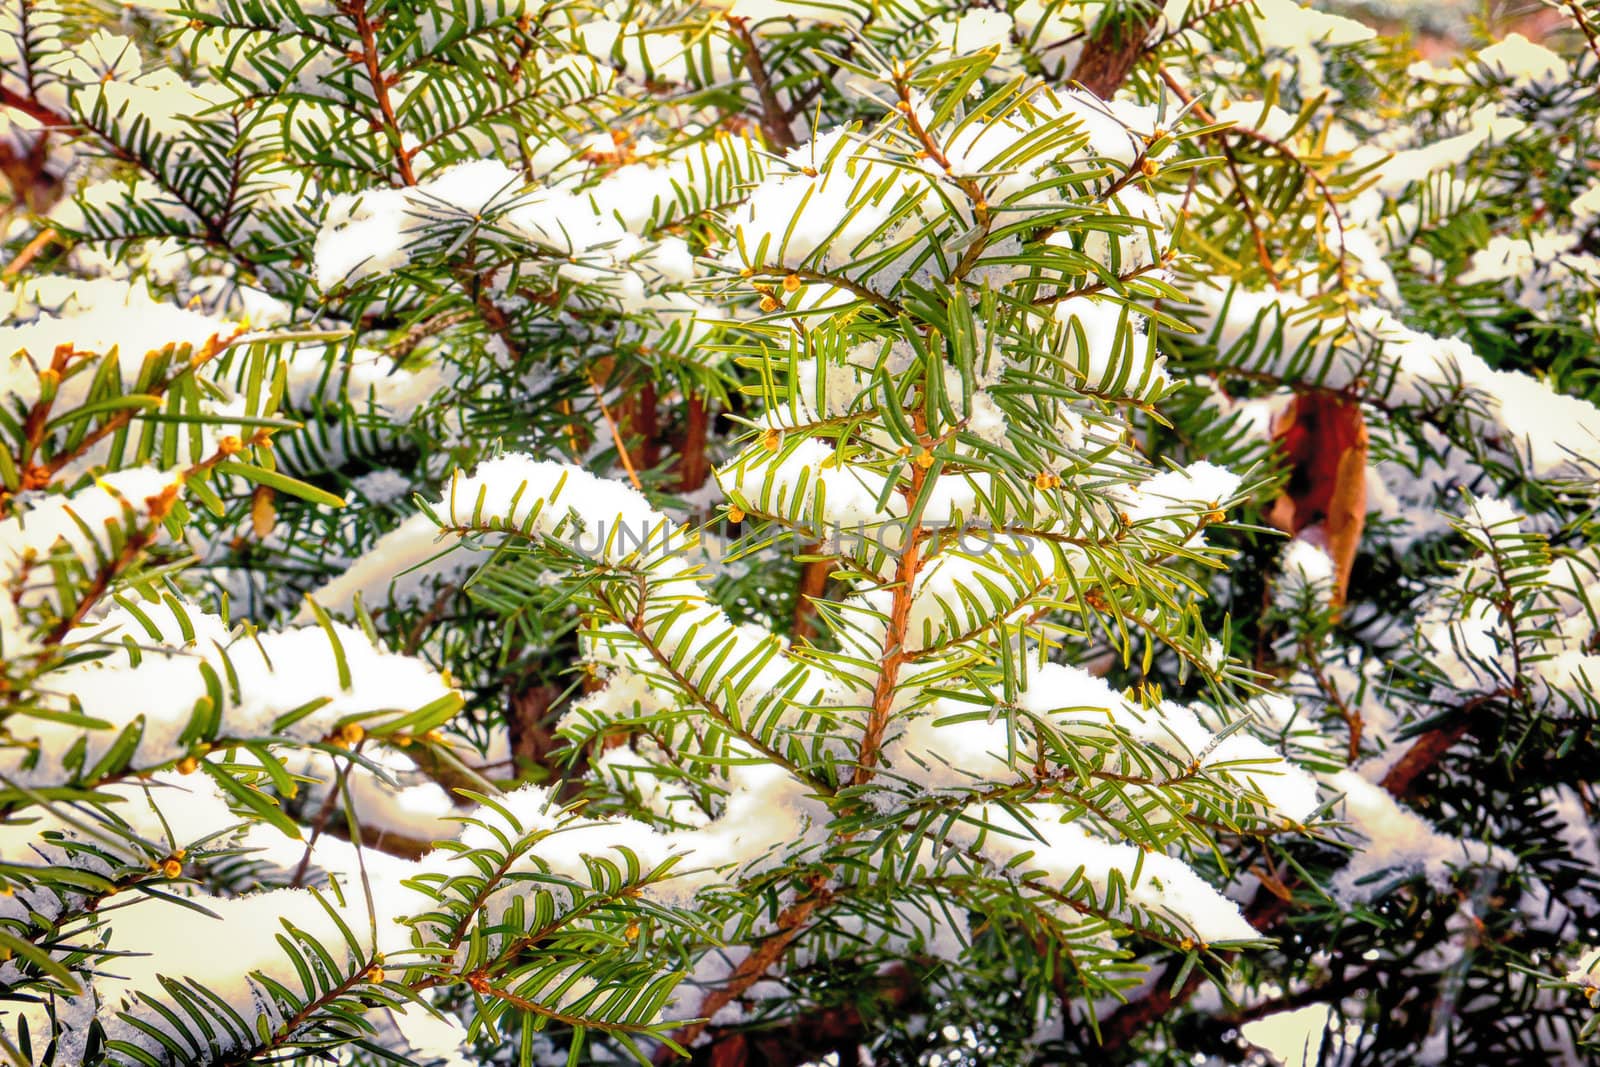 Yew Branches in the Winter Snow by wolterk